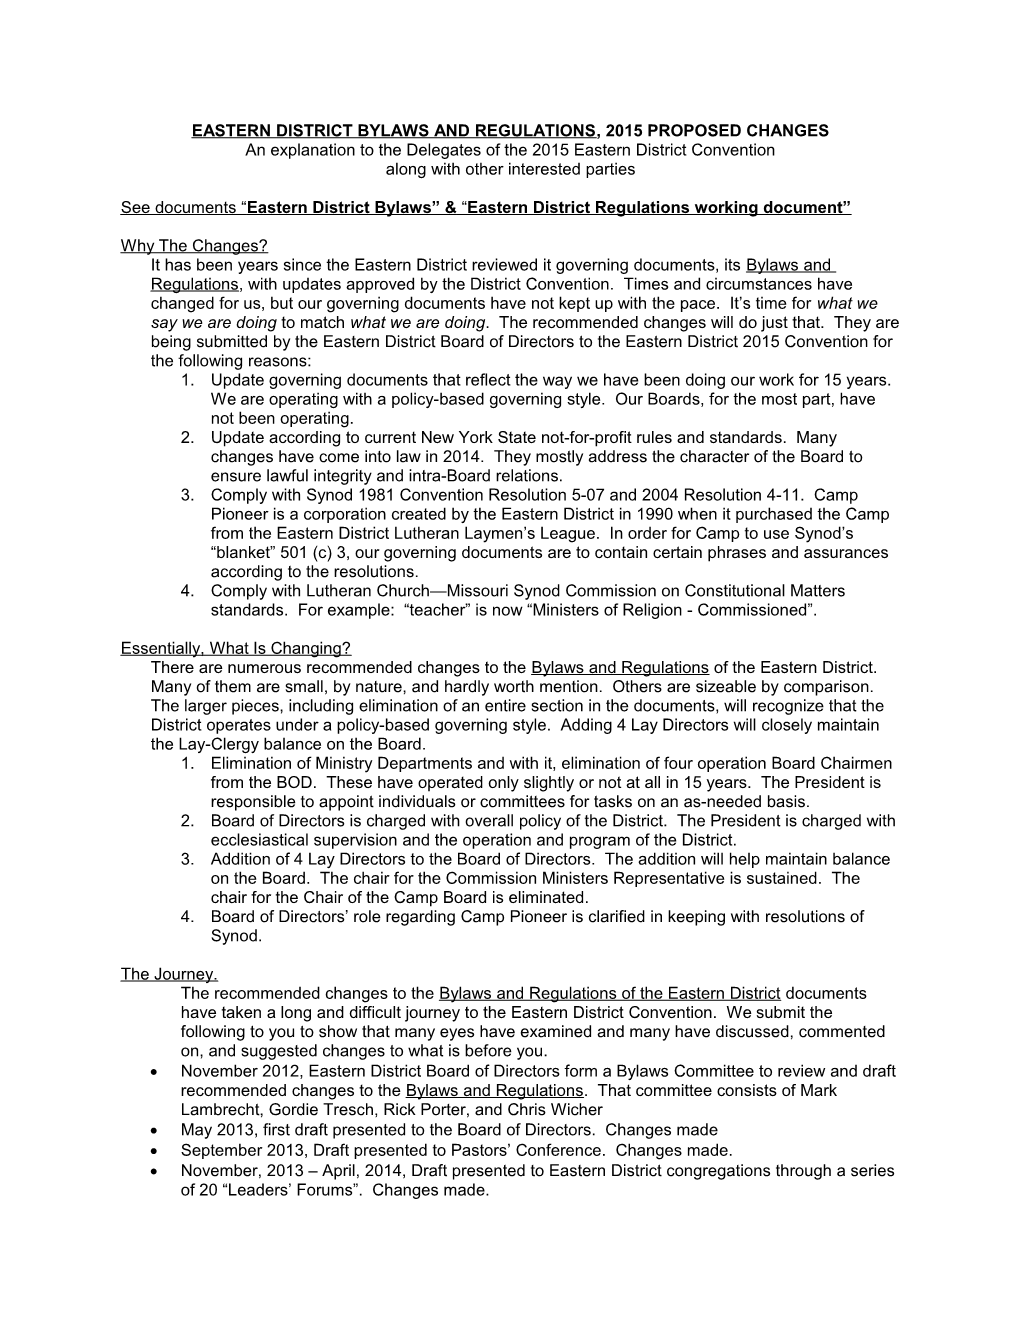 Eastern District Bylaws and Regulations, 2015 Proposed Changes